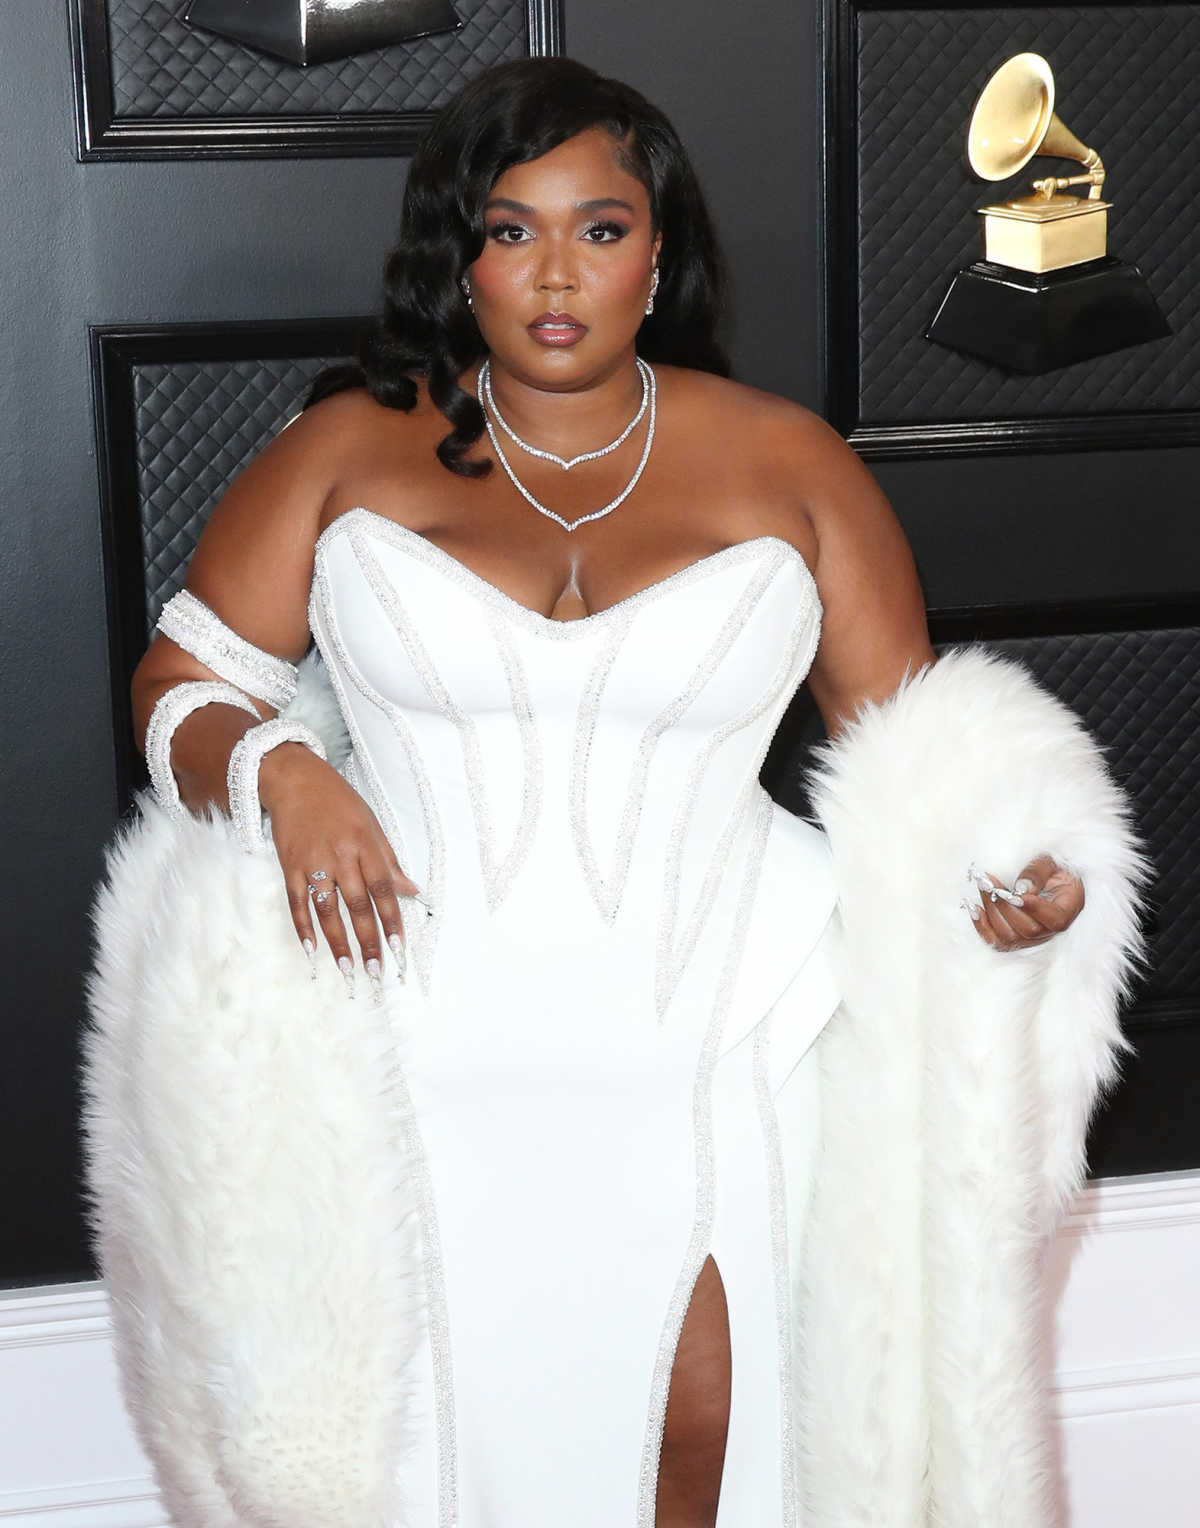 Lizzo hits out at TikTok for 'removing bathing suit videos - but